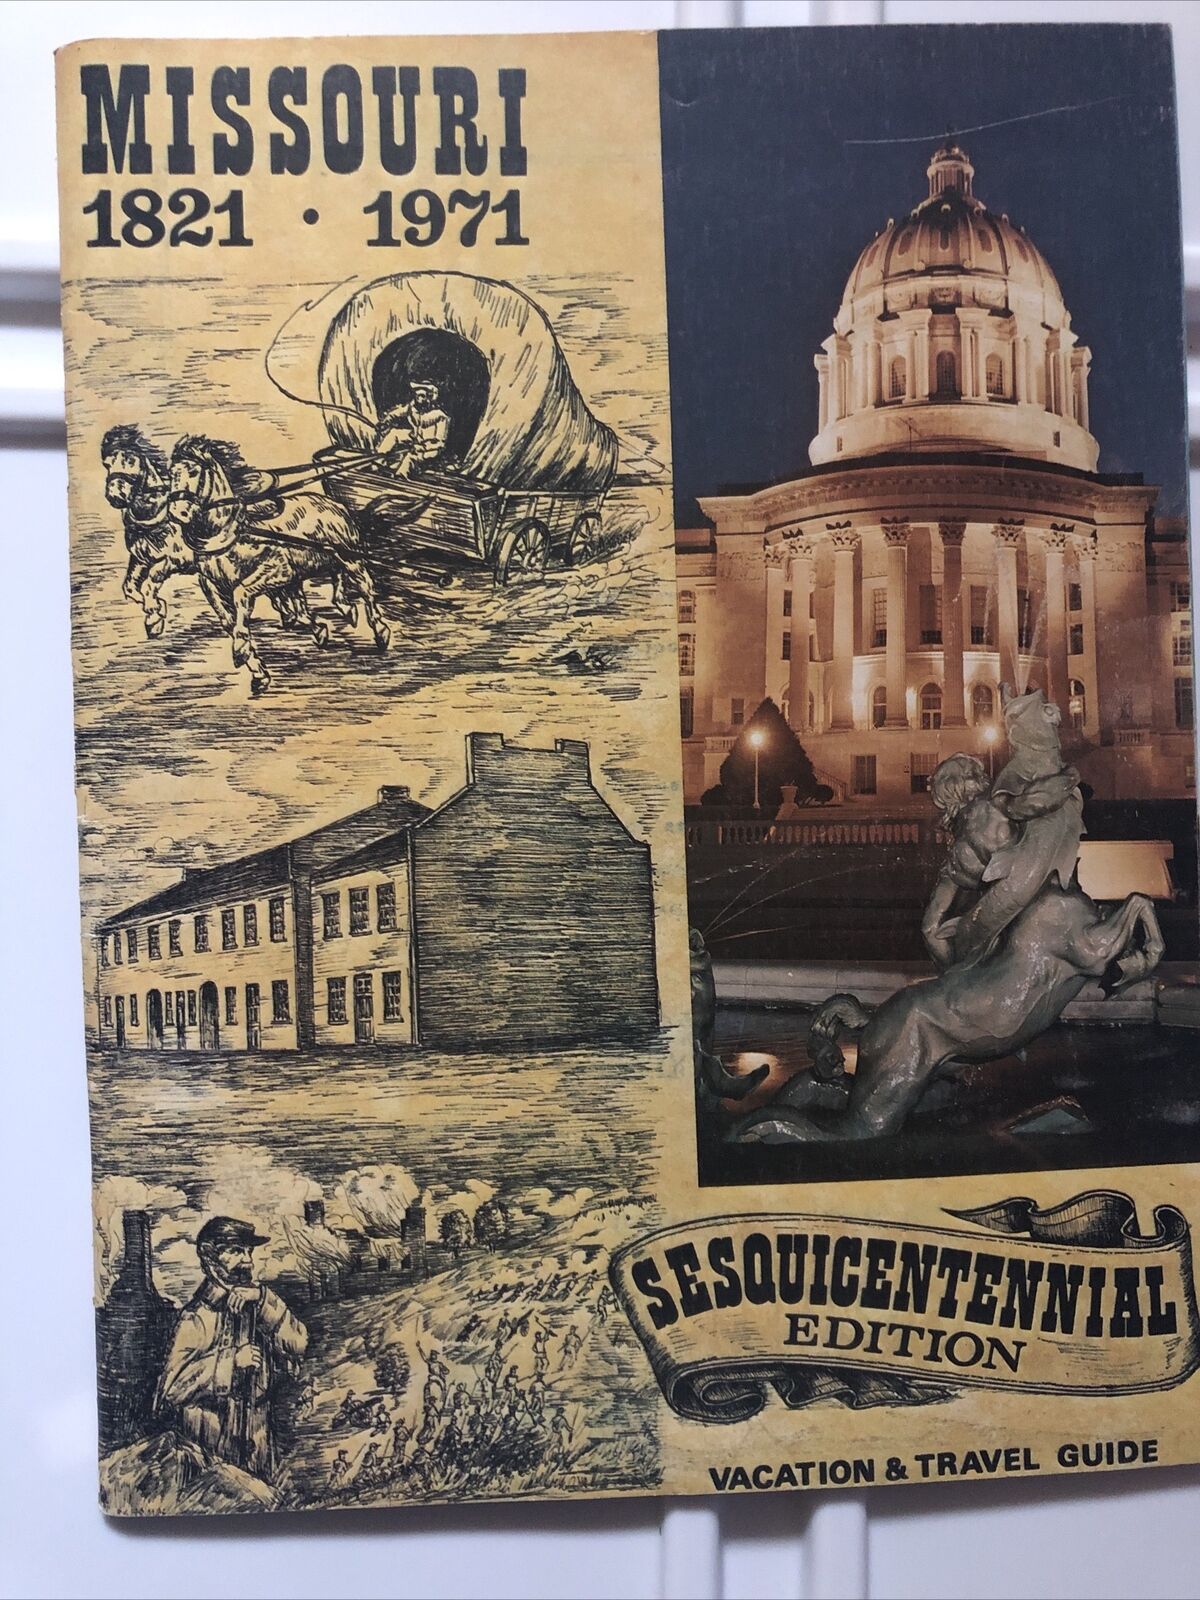 Vintage Missouri 1821- 1971 Sesquicentennial Edition Vacation & Travel Guide